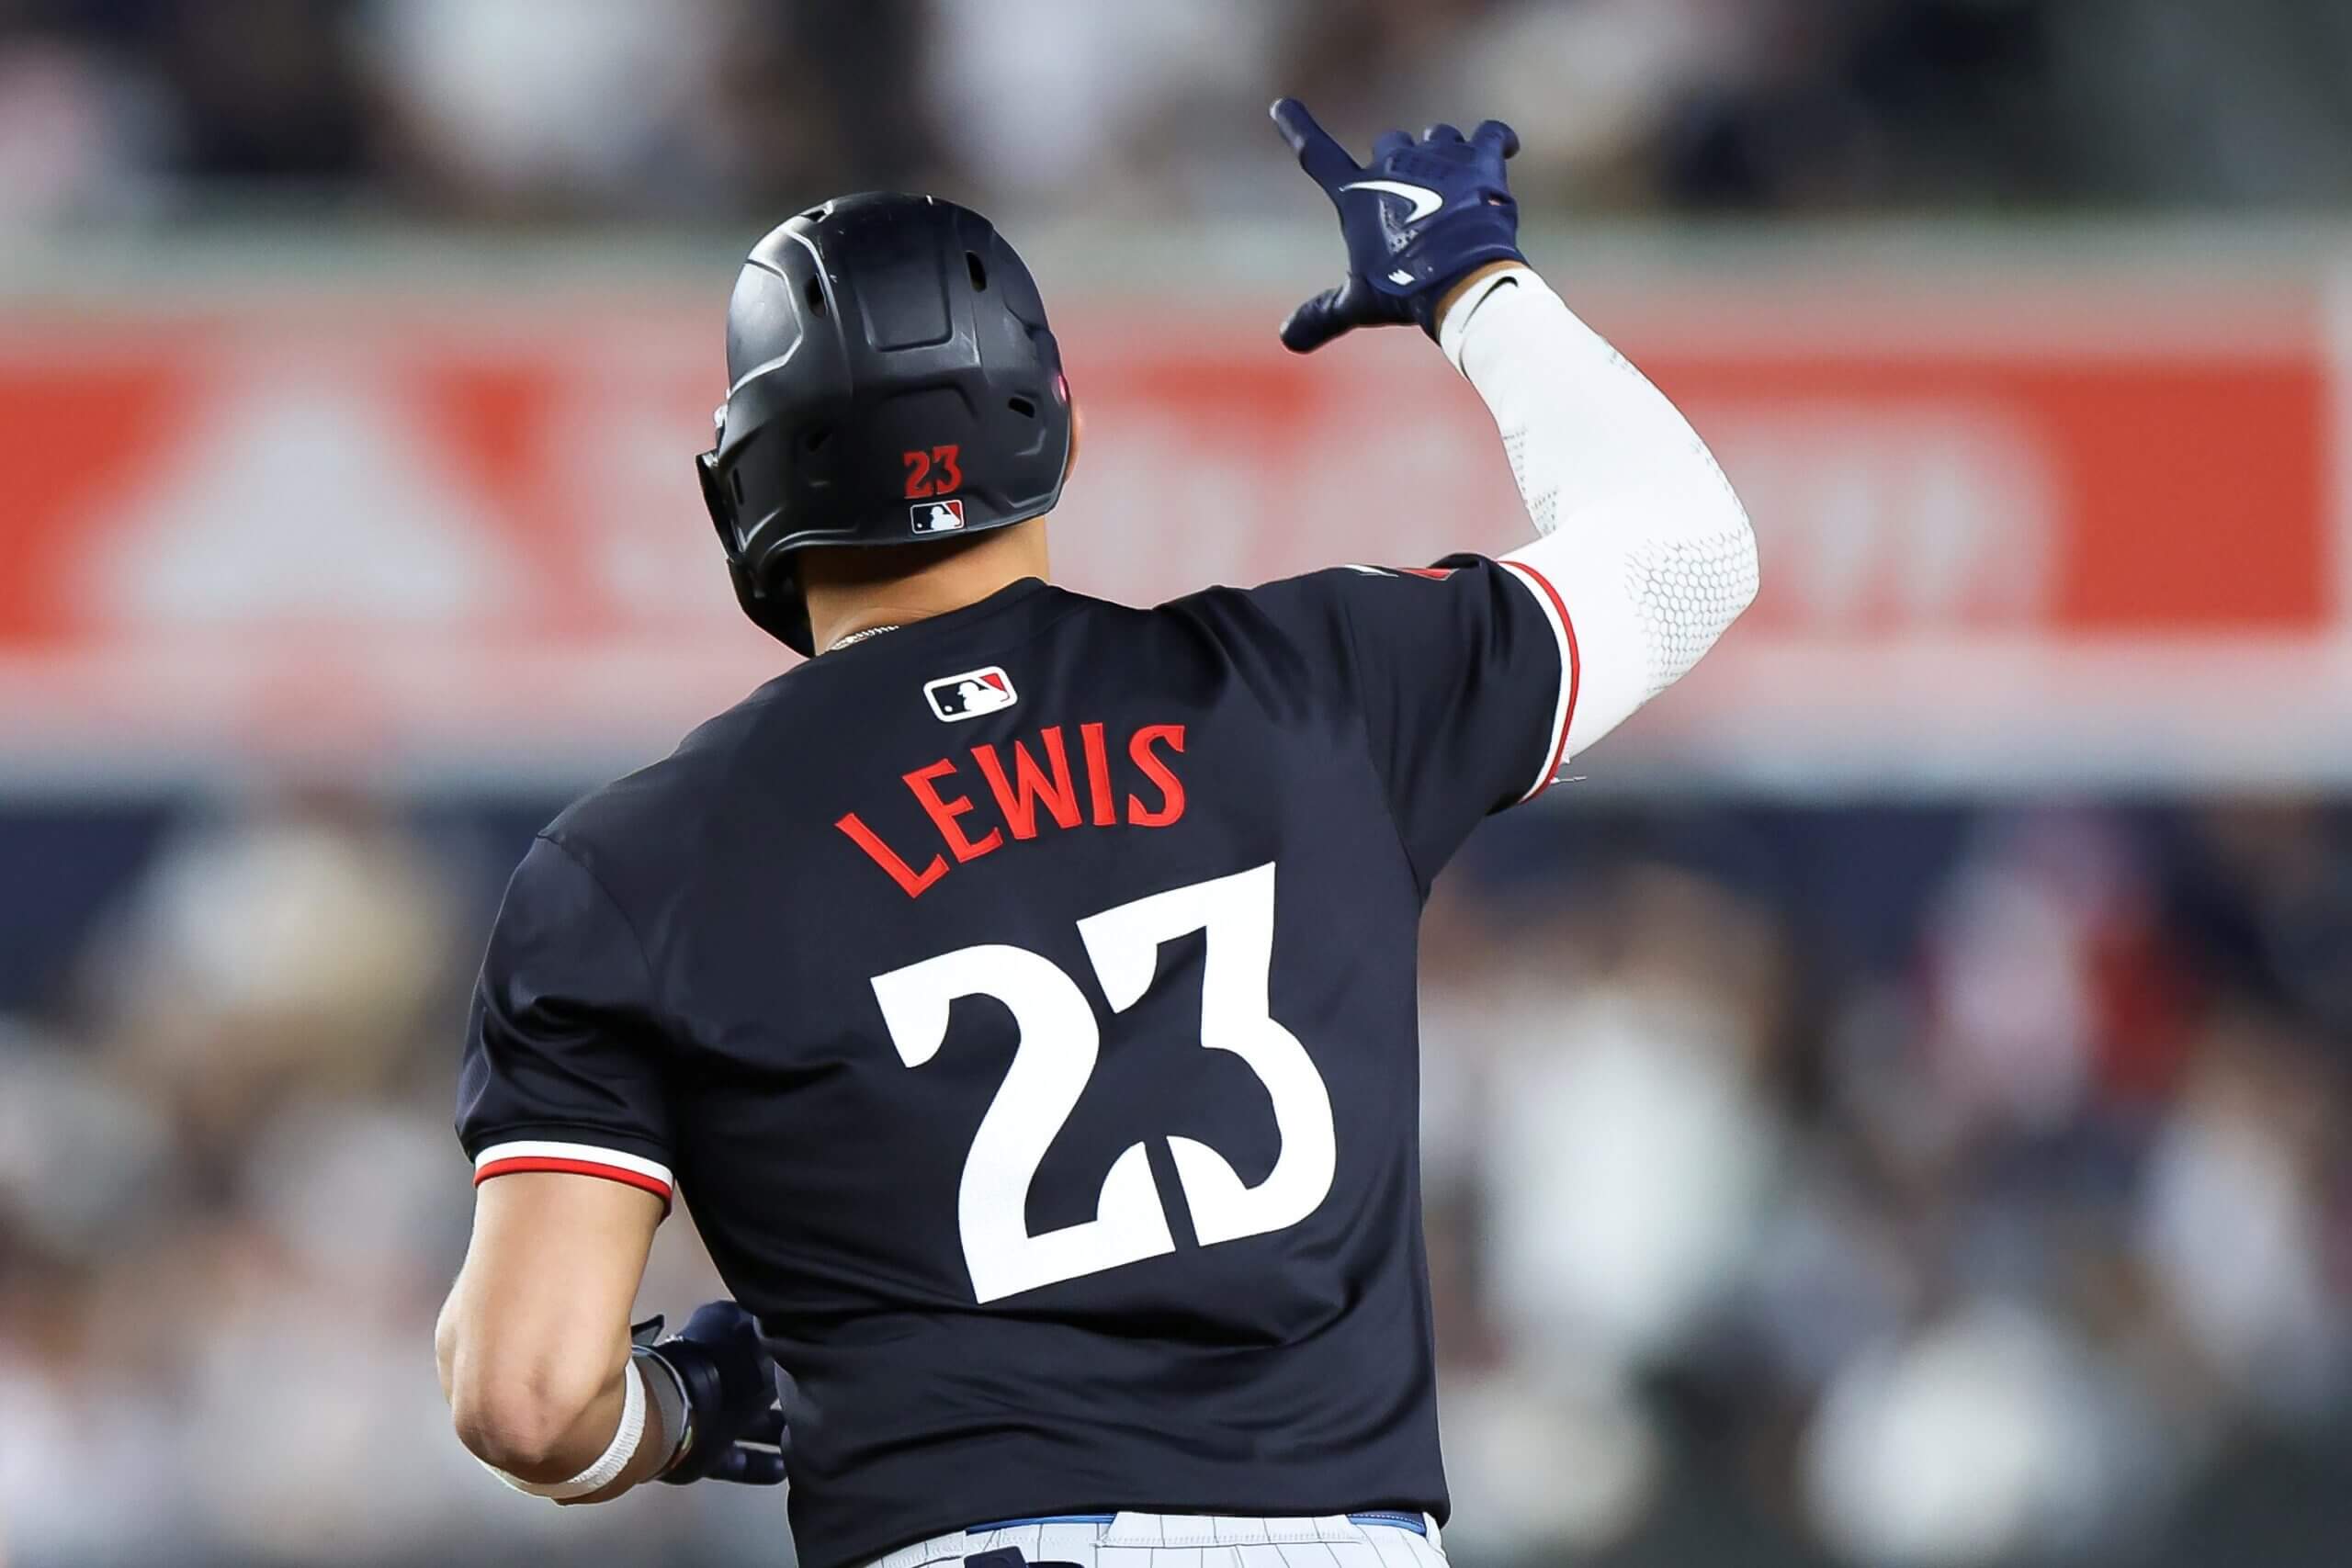 Despite another home run from Royce Lewis, Twins outclassed by Yankees yet again